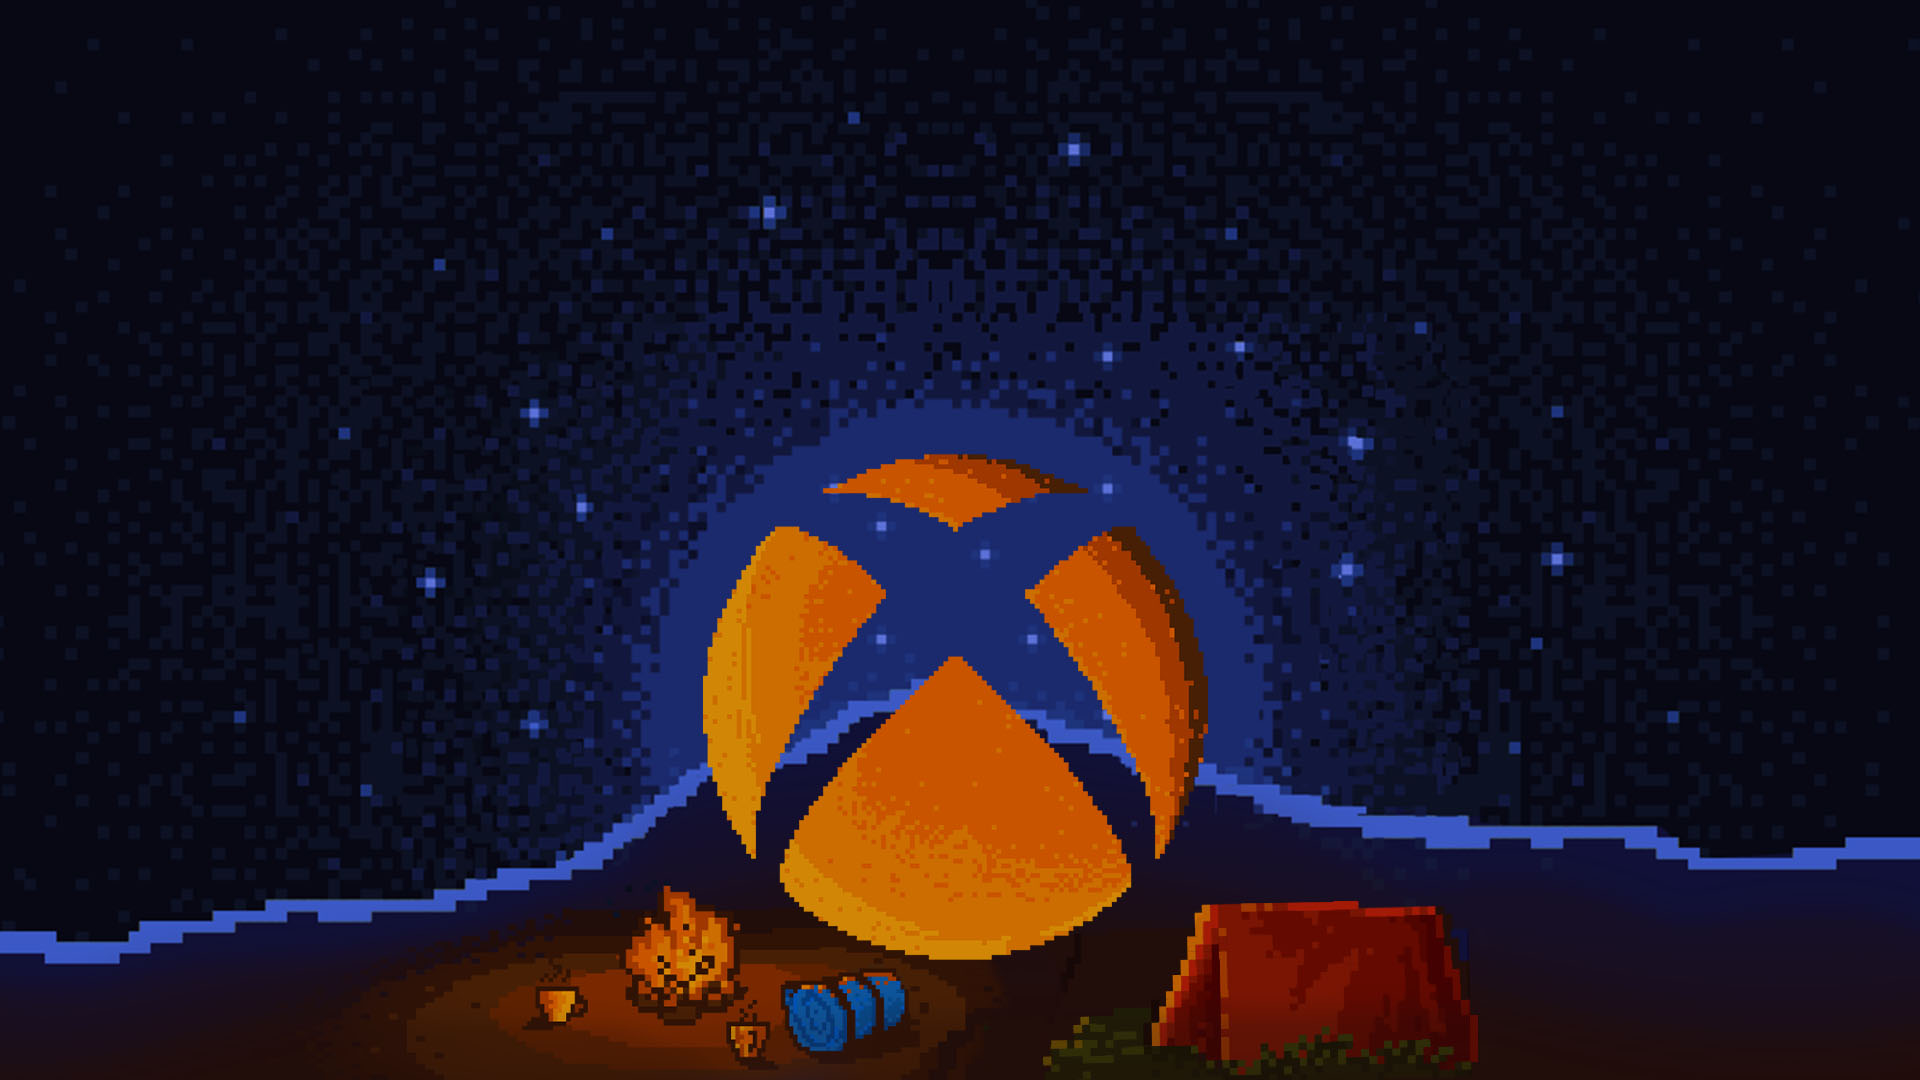 An orange Xbox sphere with an orange tent, campfire, two orange mugs, and a blue bed roll with a blue star-filled sky in the background in the style of retro 16-bit games.